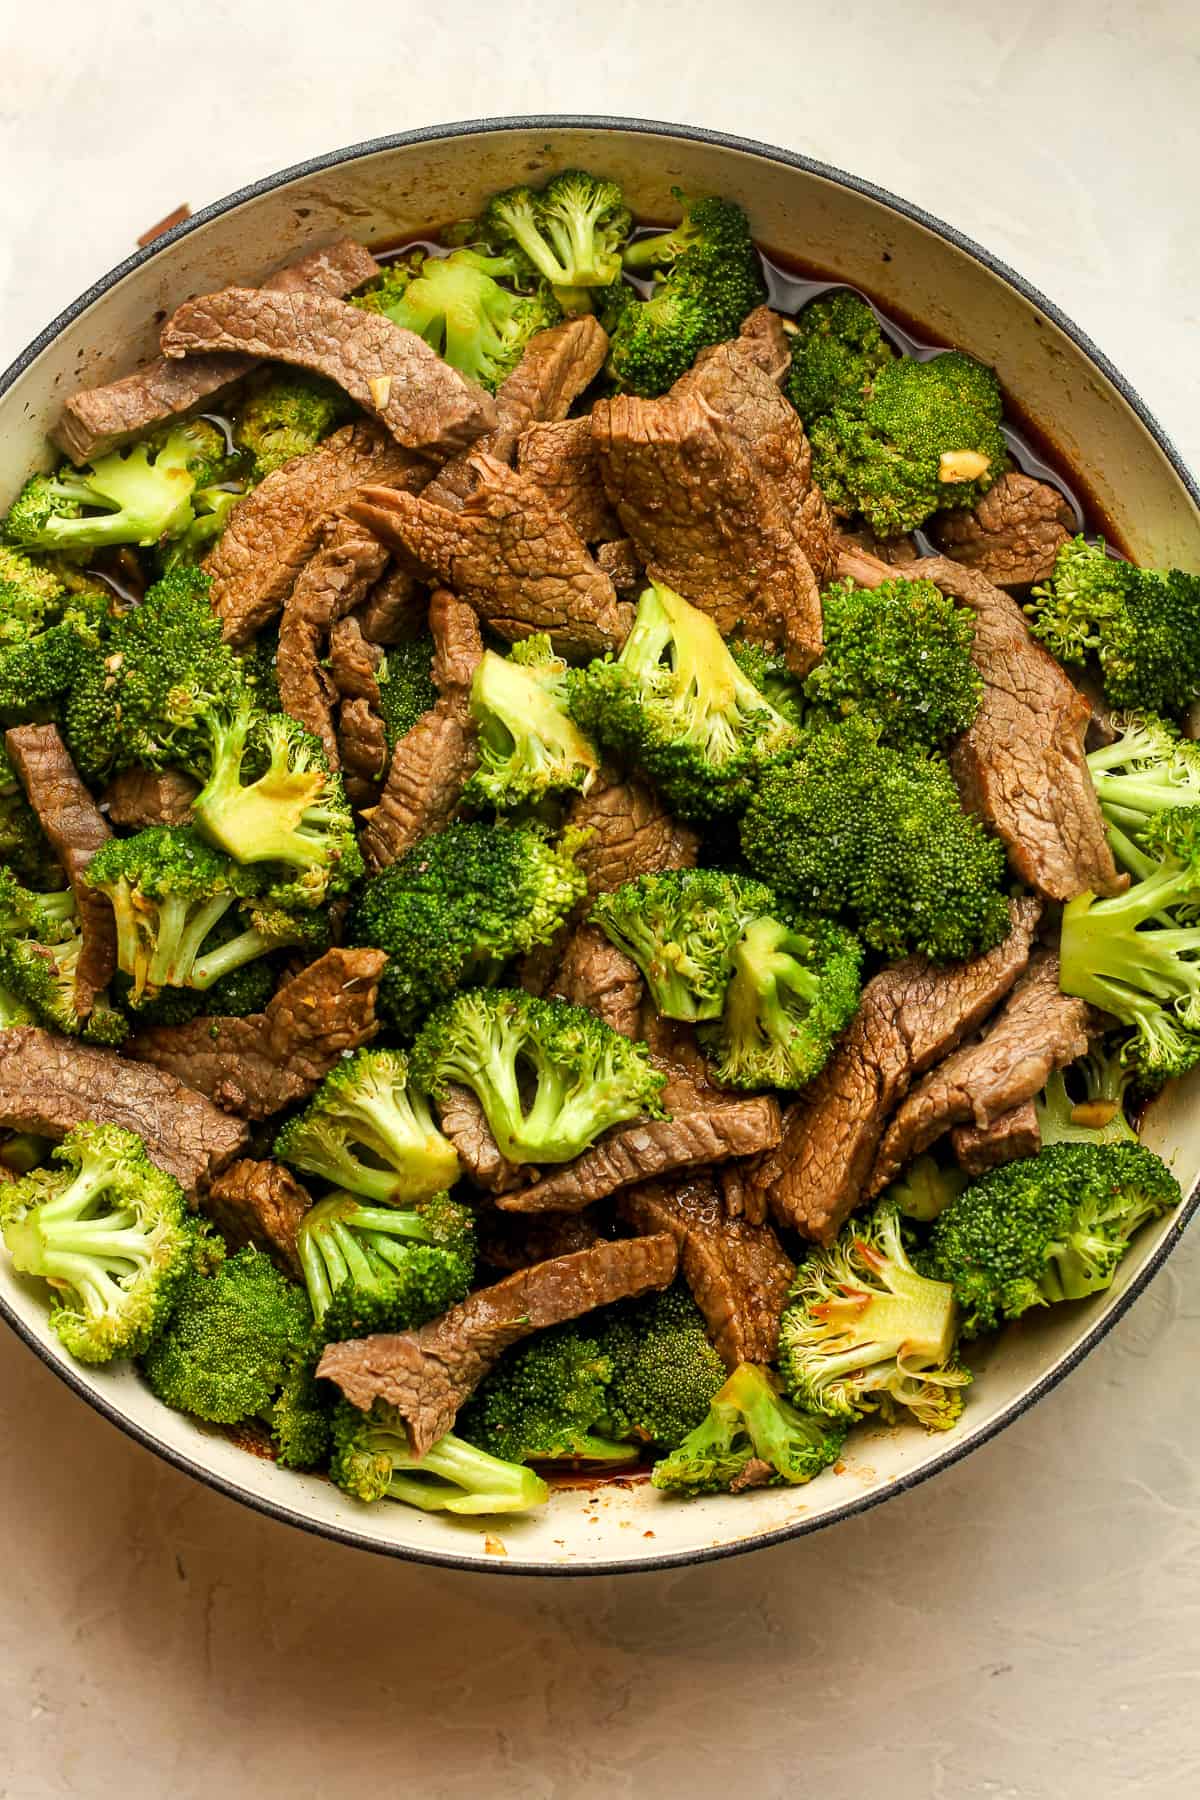 A braised with beef an broccoli.